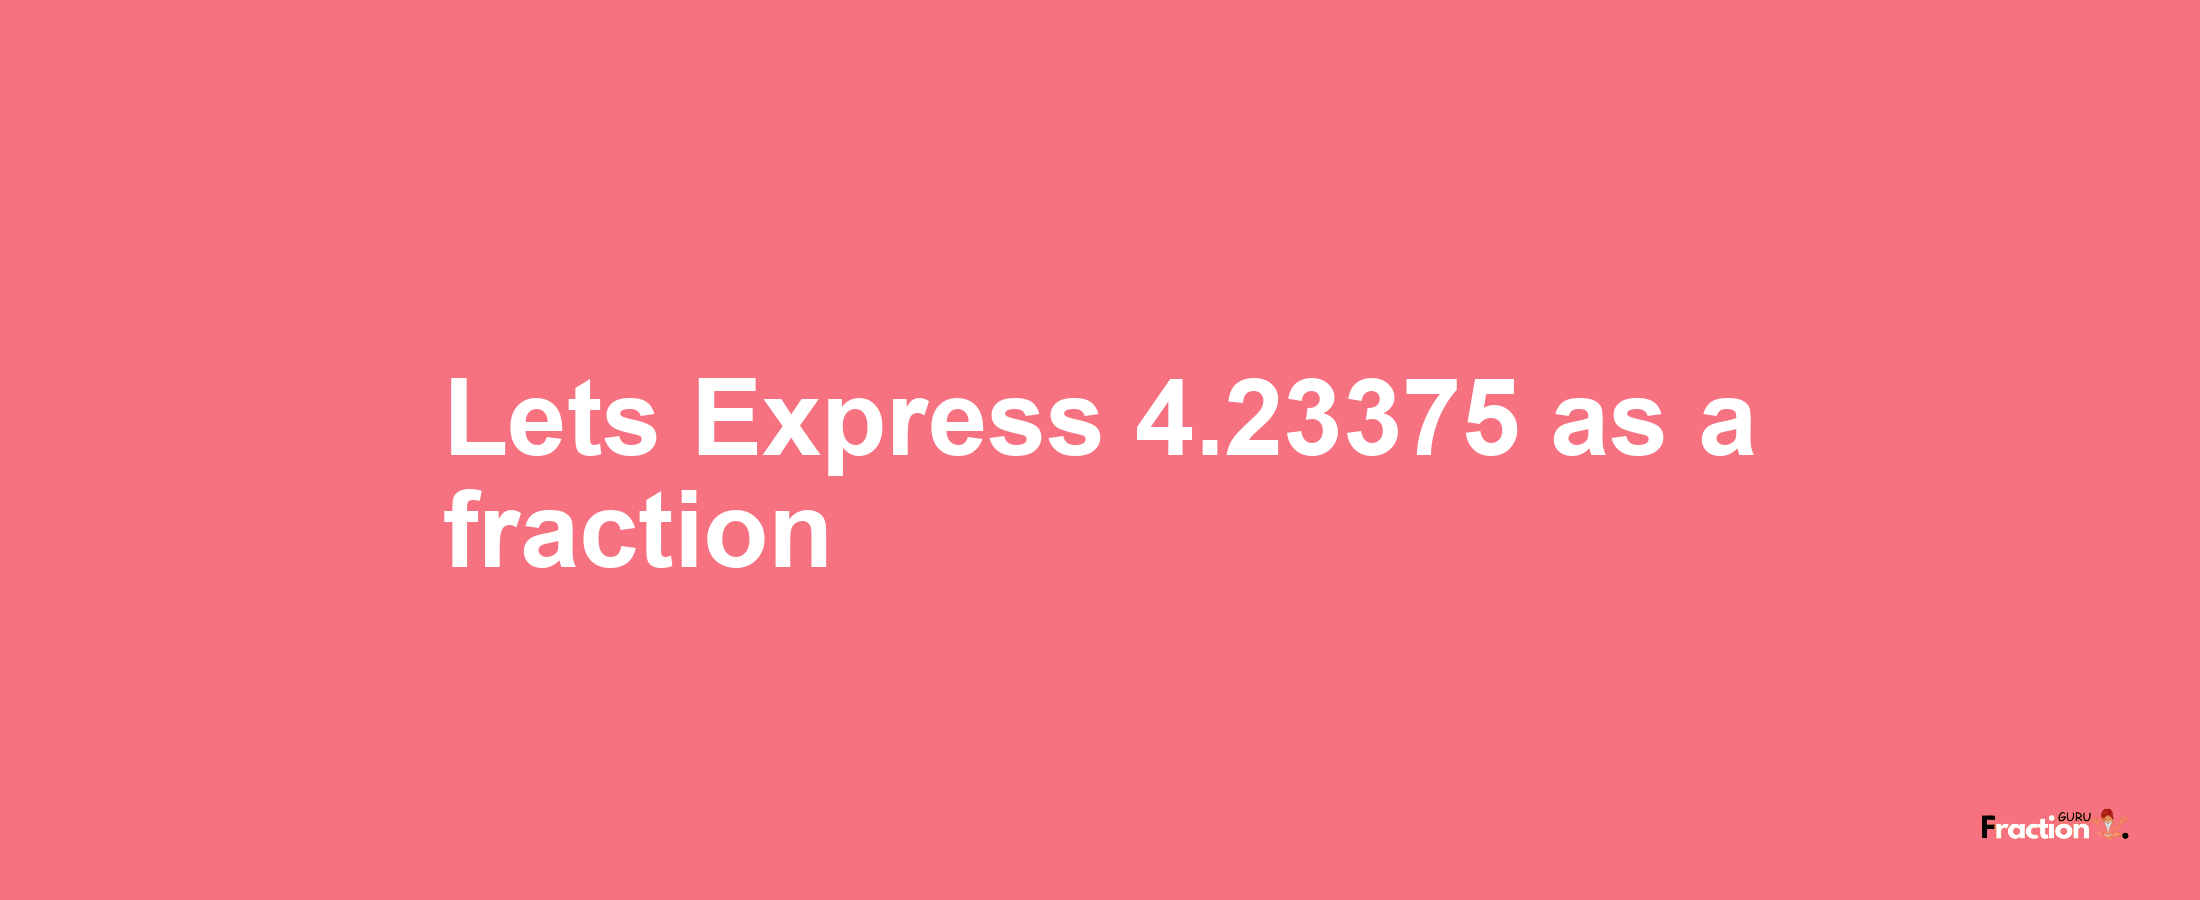 Lets Express 4.23375 as afraction